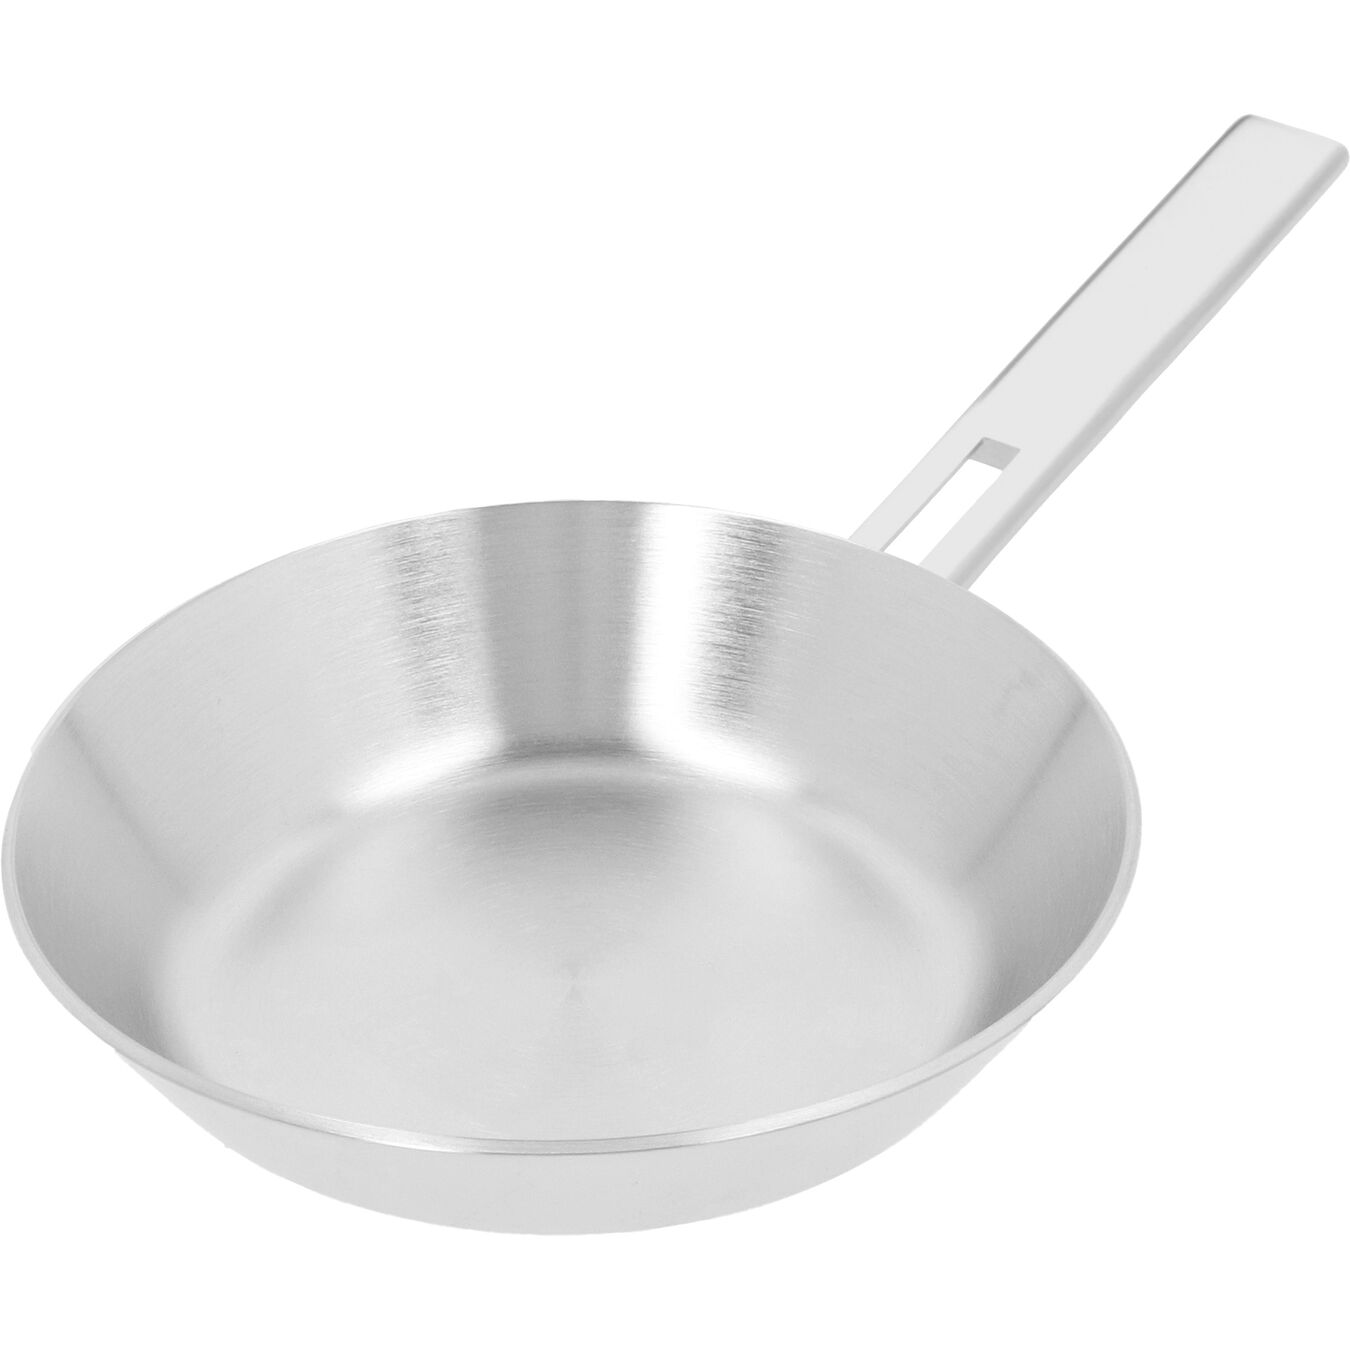 9.5-inch, 18/10 Stainless Steel, Frying pan,,large 4